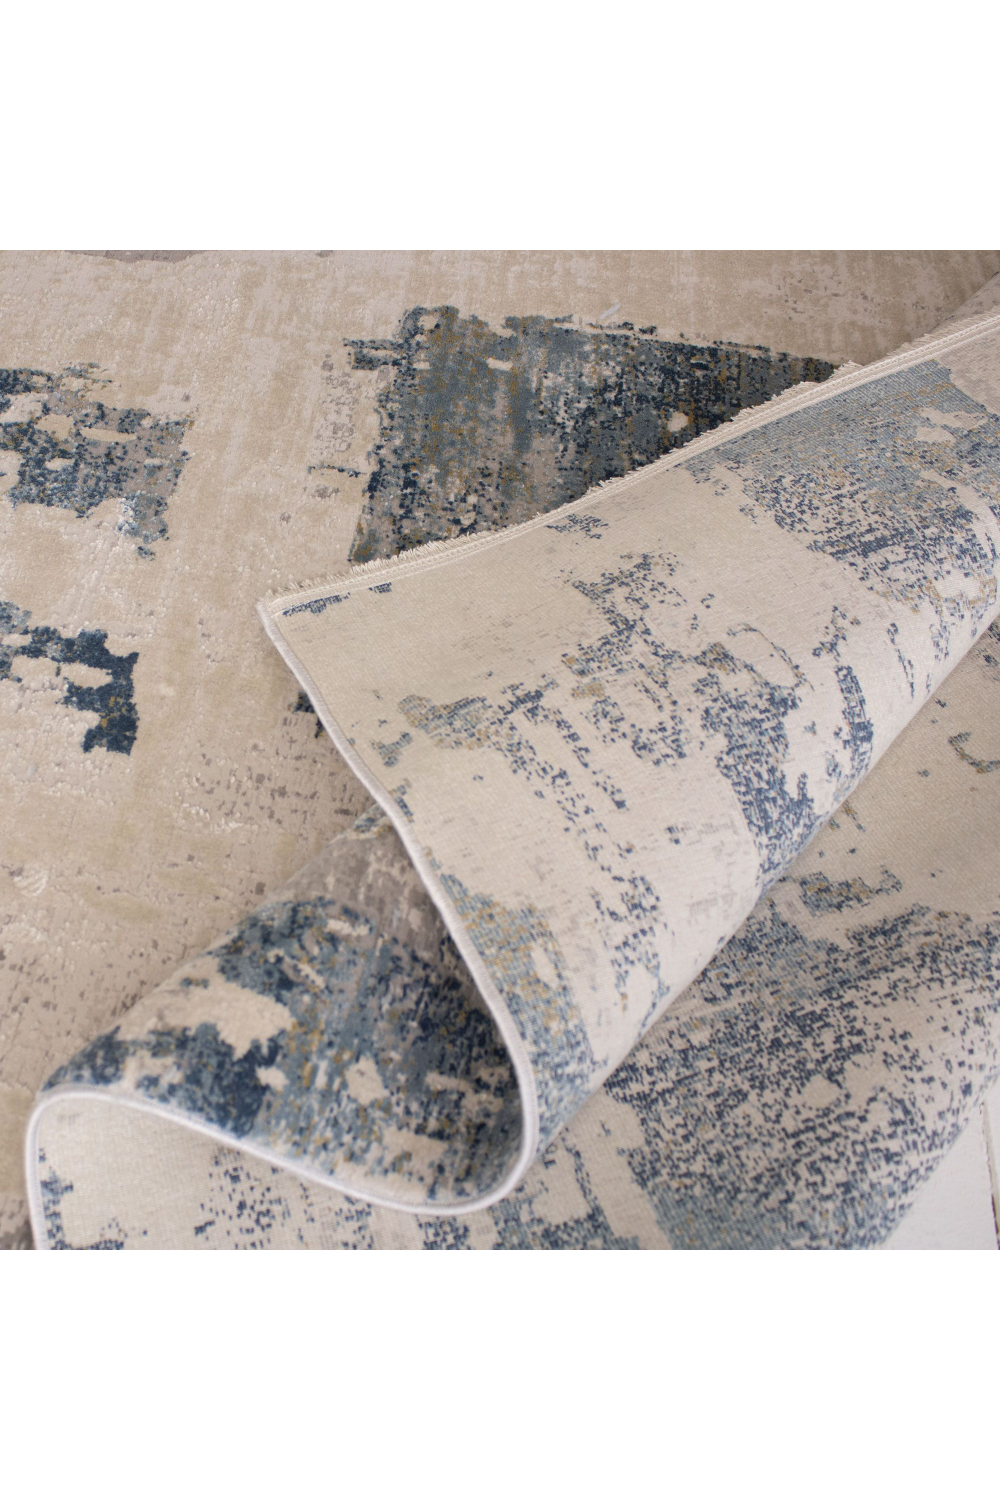 Blue and Beige Patterned Rug 5' x 8' | Andrew Martin Azra | Oroa.com